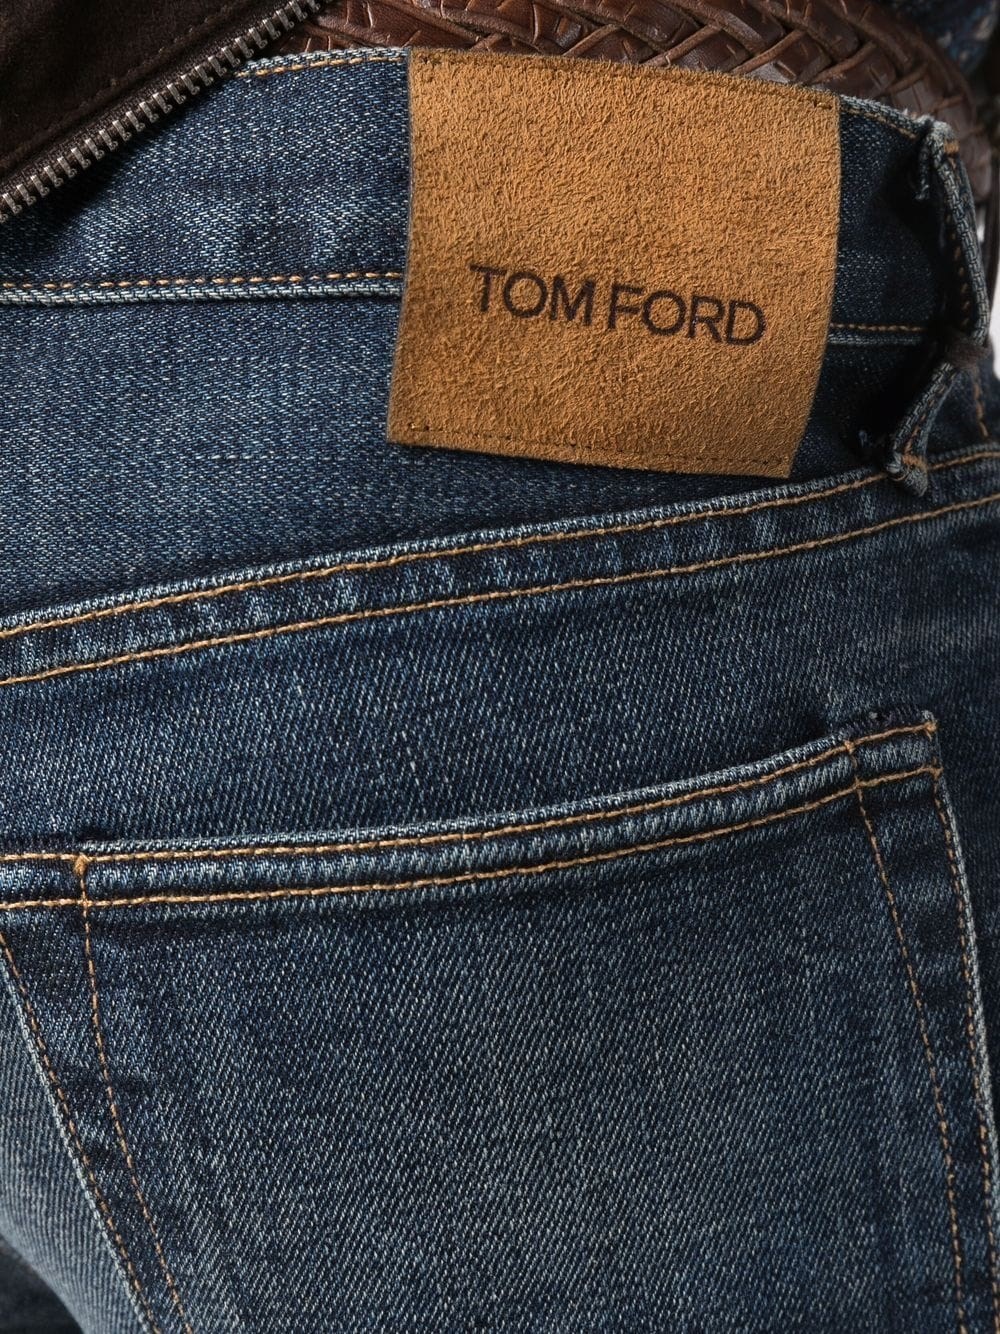 tom ford JEANS available on  - 42639